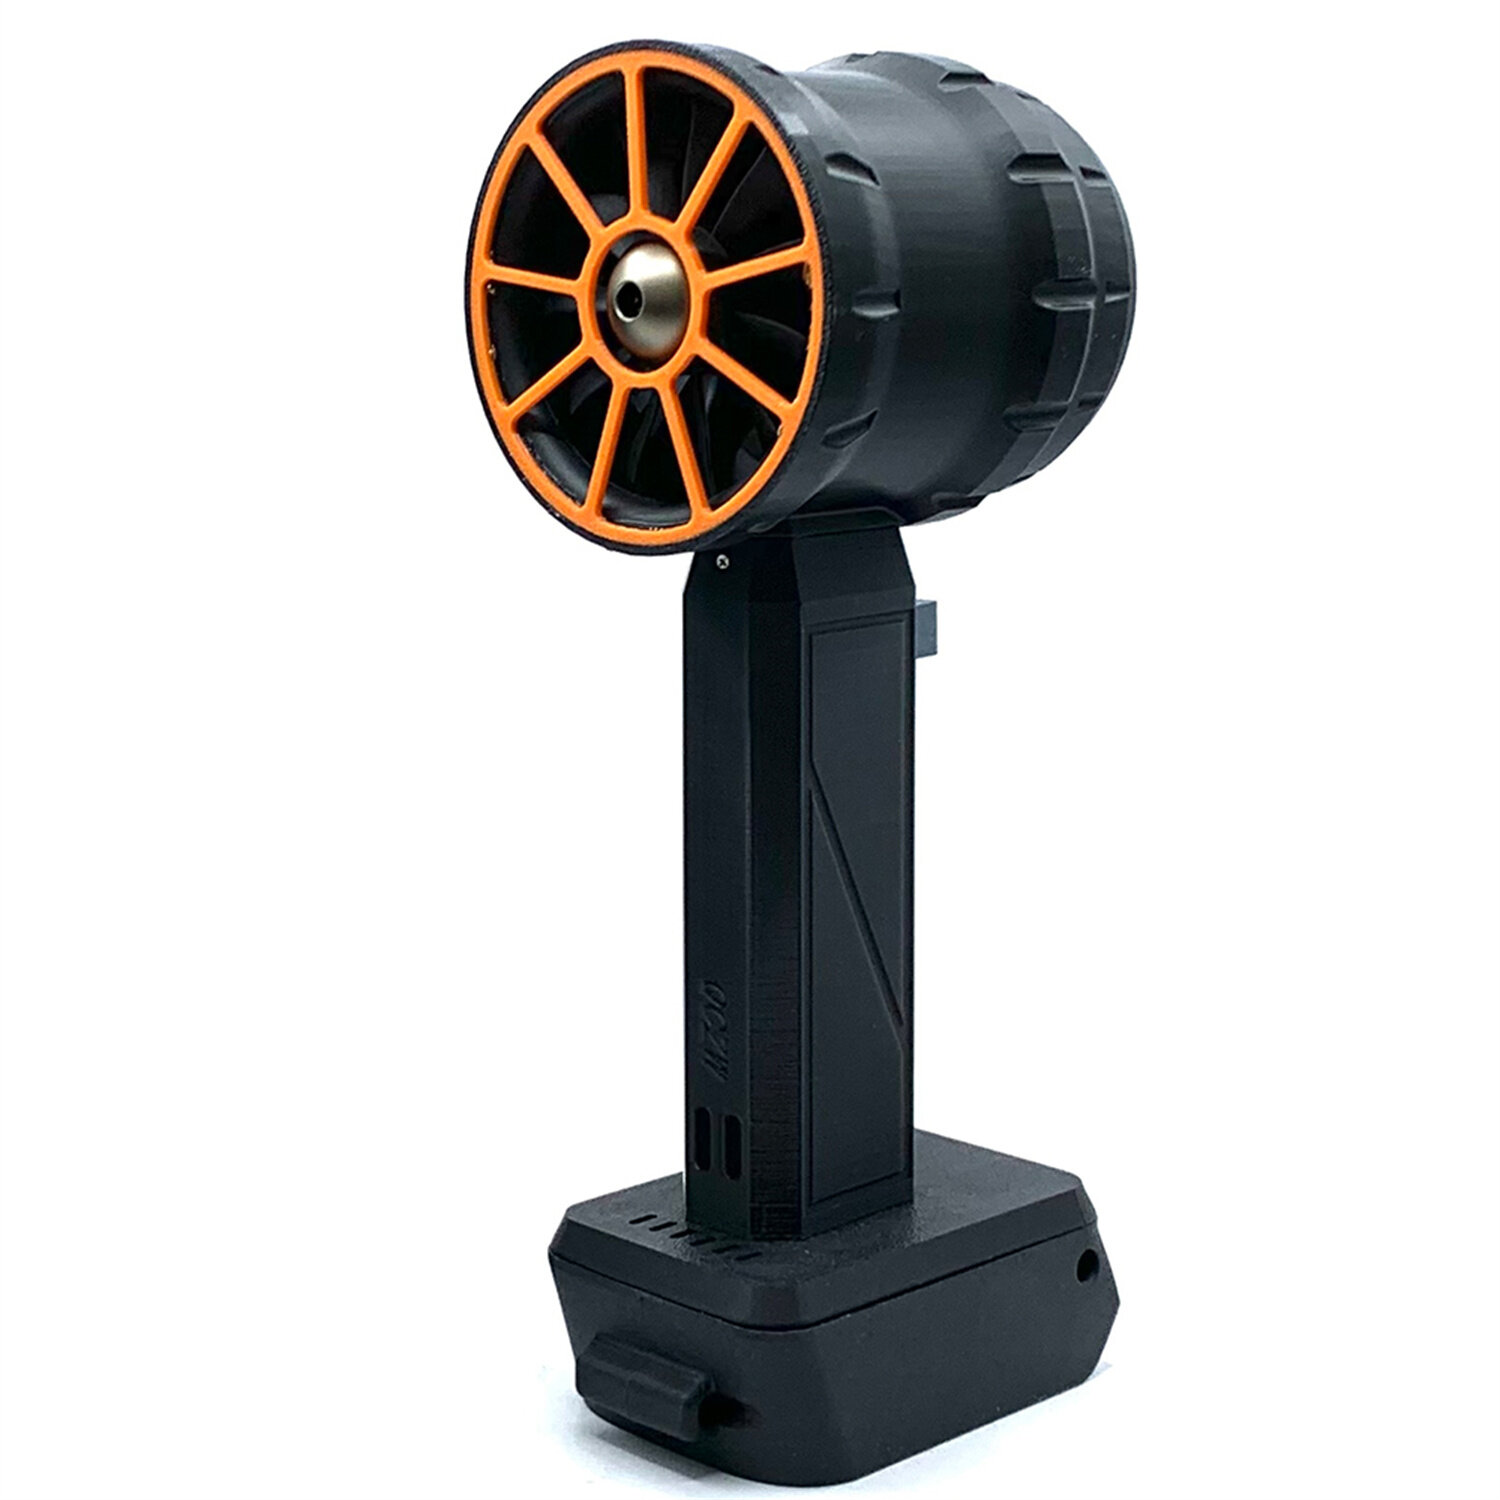 64mm Turbo Fan High-Speed Brushless Motor 2200g Thrust Compatible with Dewal/Mak/Milwauke 18/21V Batteries Ergonomic Press Type Speed Regulation Perfect for Vehicle Drying